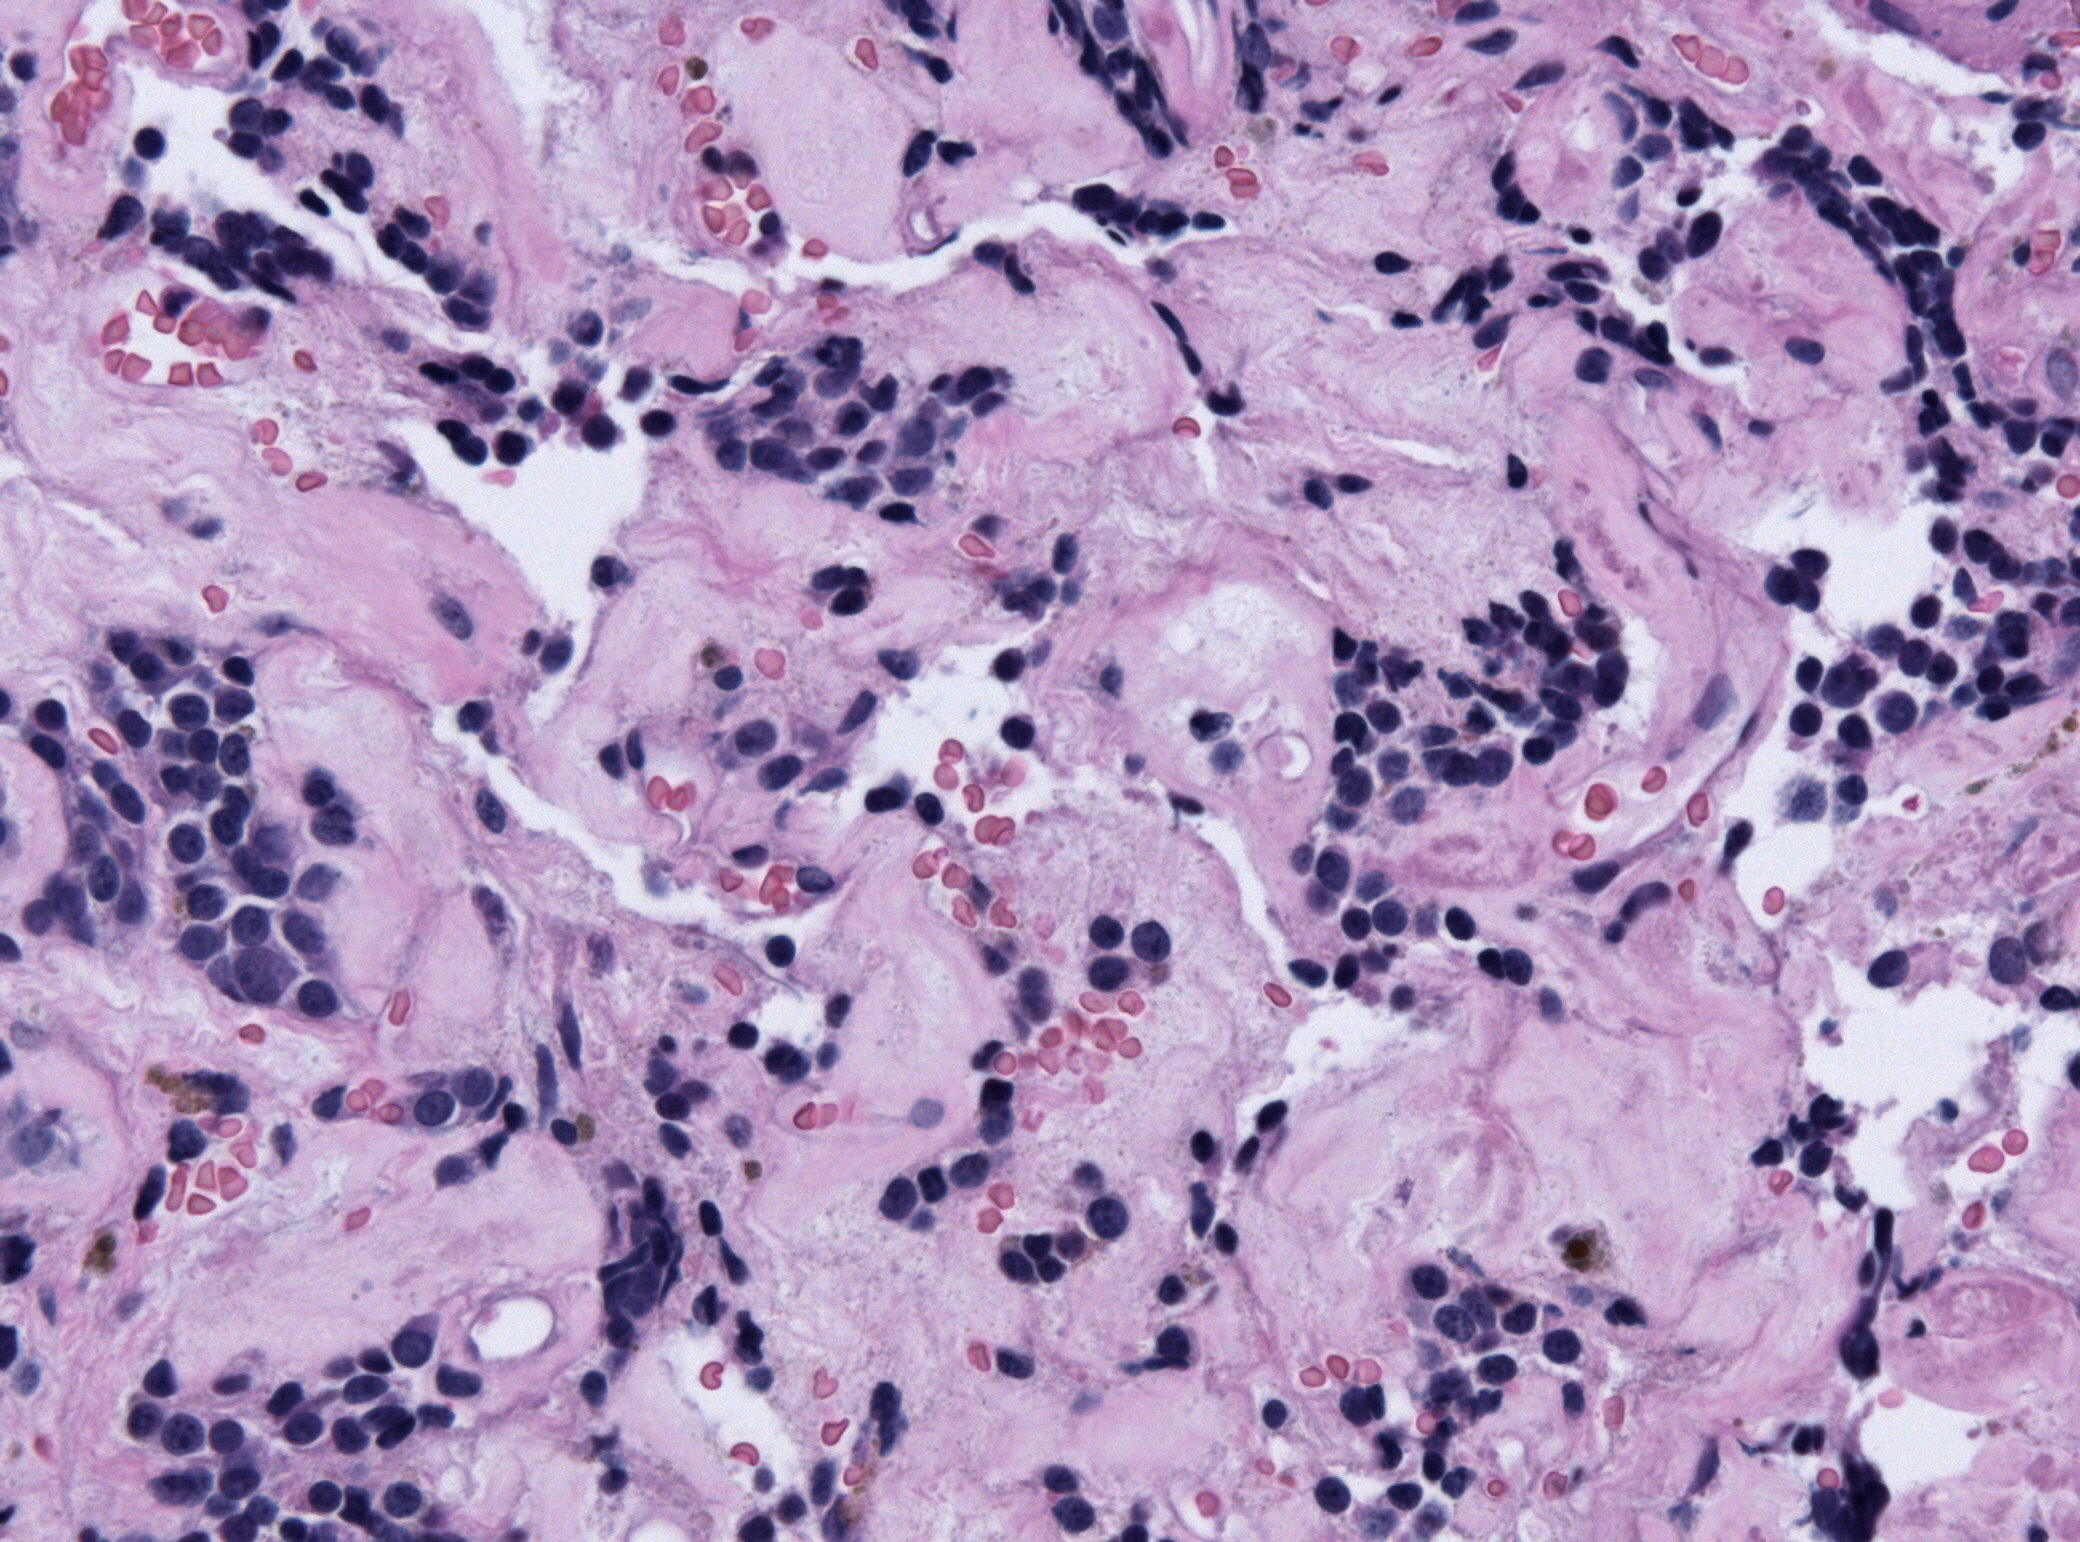 Pituitary adenoma of lactotroph cells (prolactin producing) regression after treatment - by Jensflorian source: Librepathology